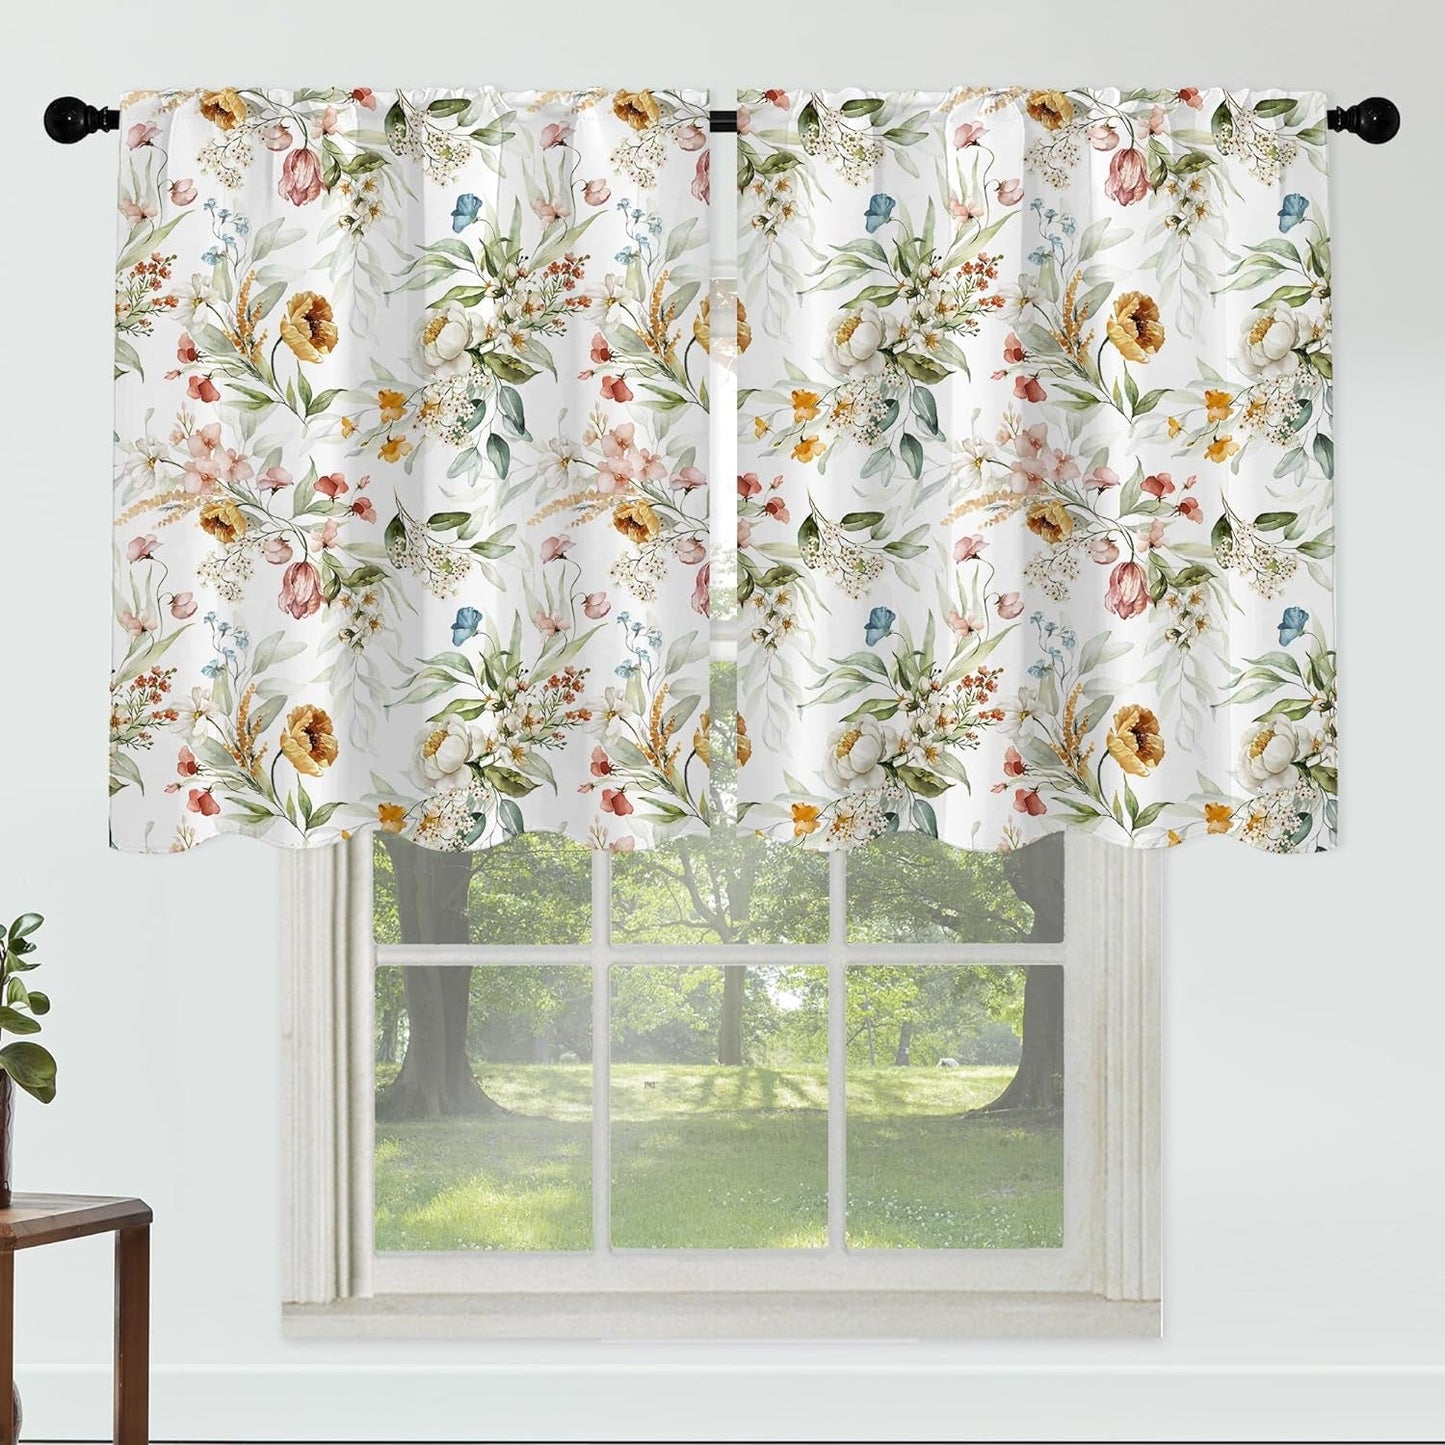 Floral Leaves Curtain for Kitchen Bathroom Watercolour Pink Flower Rod Pocket Window Tier Curtains Valance Set 3 Pcs Plant Printed Curtains 54 X 18 Inches + 27 X 36 Inches *2